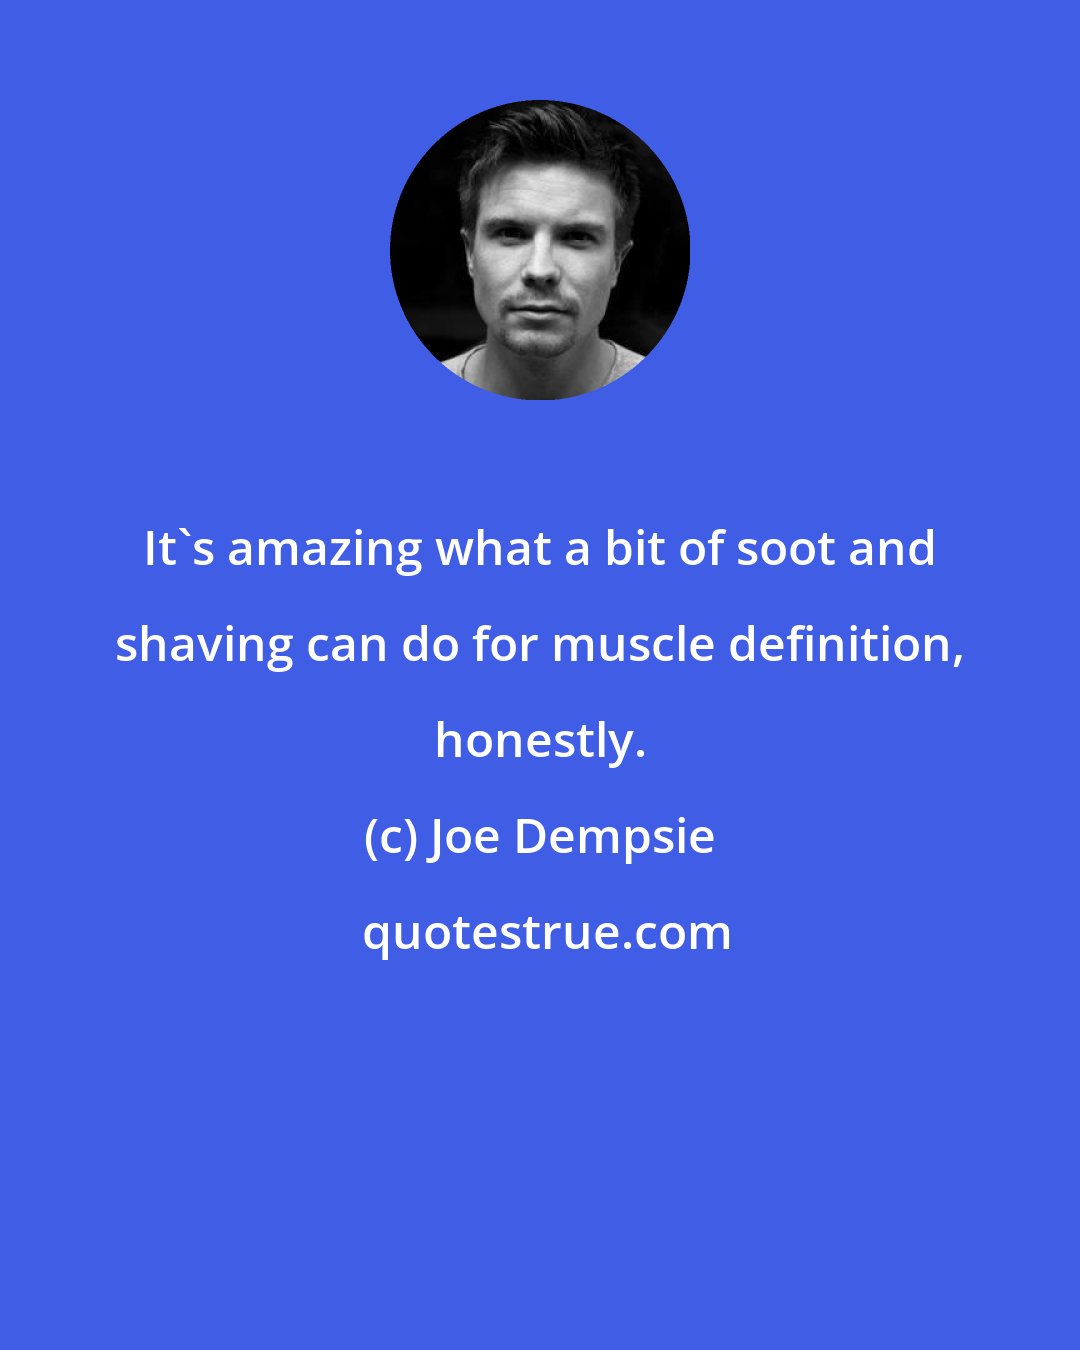 Joe Dempsie: It's amazing what a bit of soot and shaving can do for muscle definition, honestly.